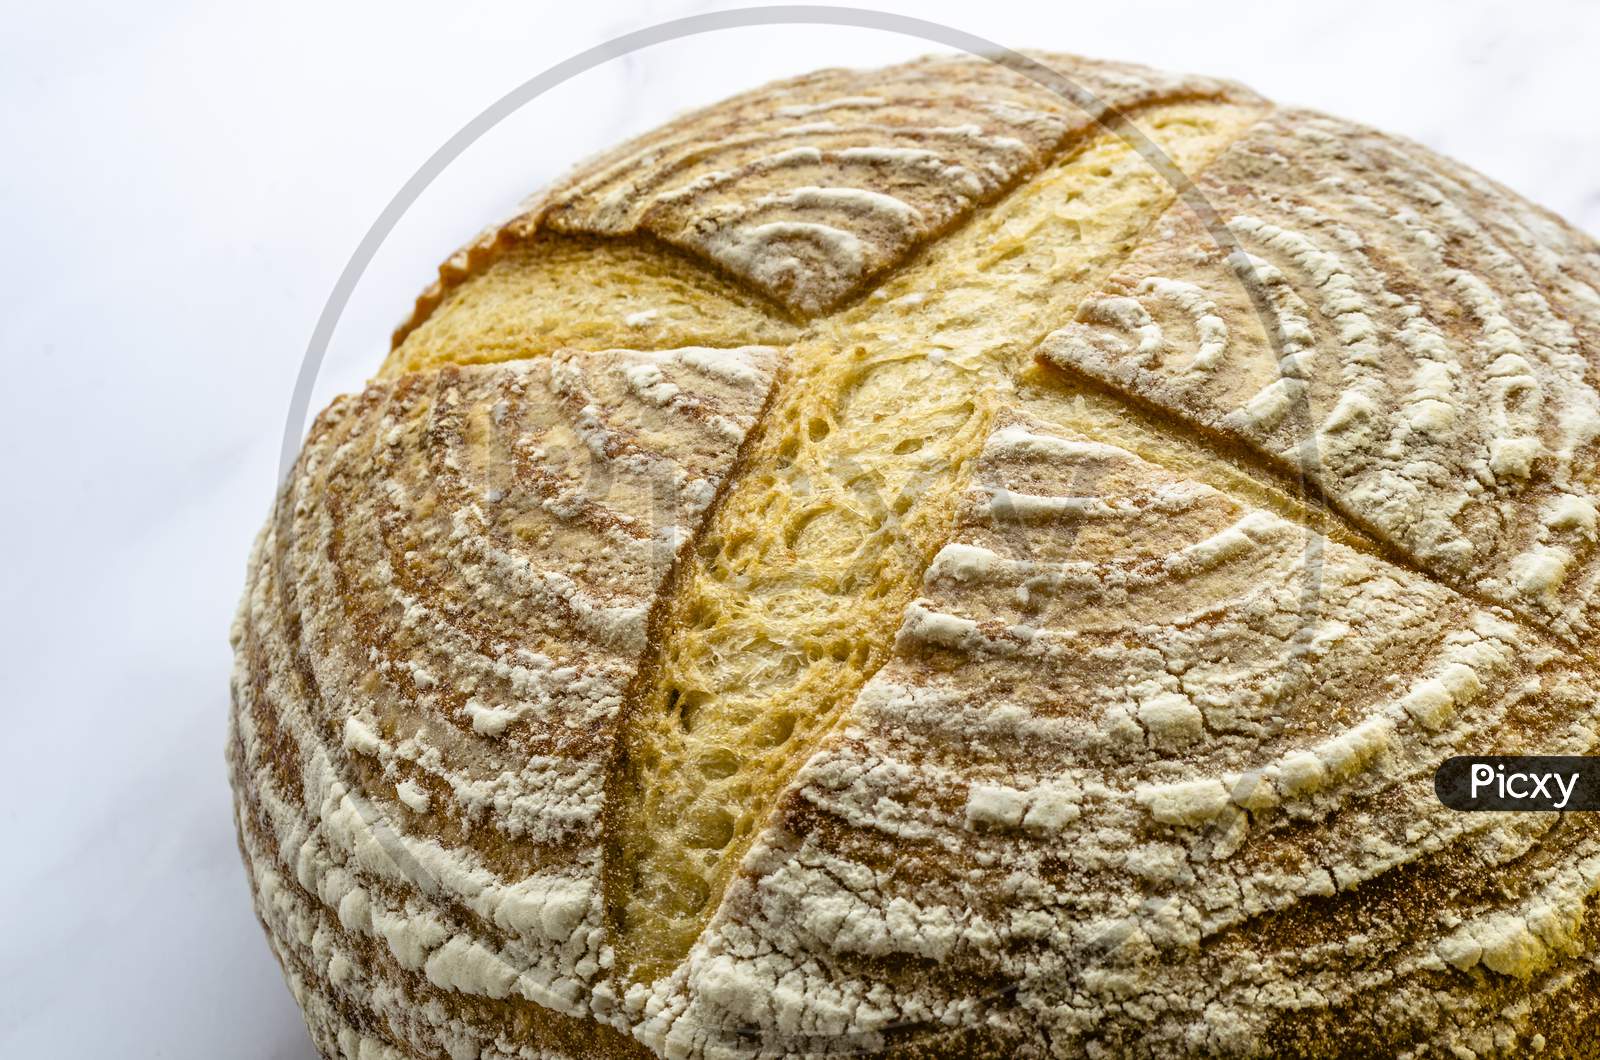 A loaf of freshly baked Sourdough bread on a plain background